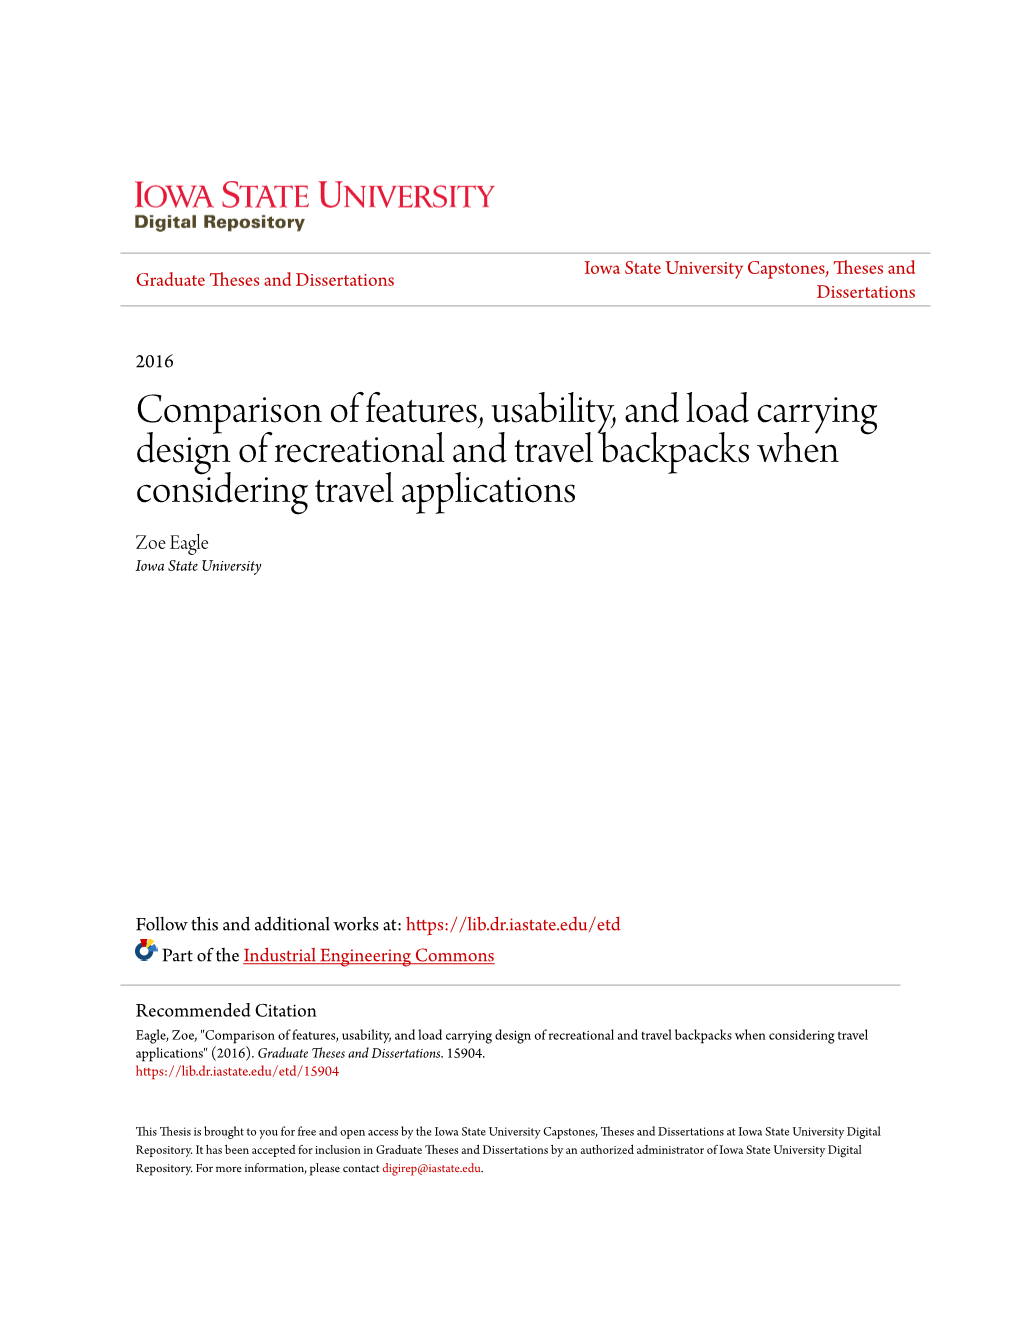 Comparison of Features, Usability, and Load Carrying Design of Recreational and Travel Backpacks When Considering Travel Applications Zoe Eagle Iowa State University